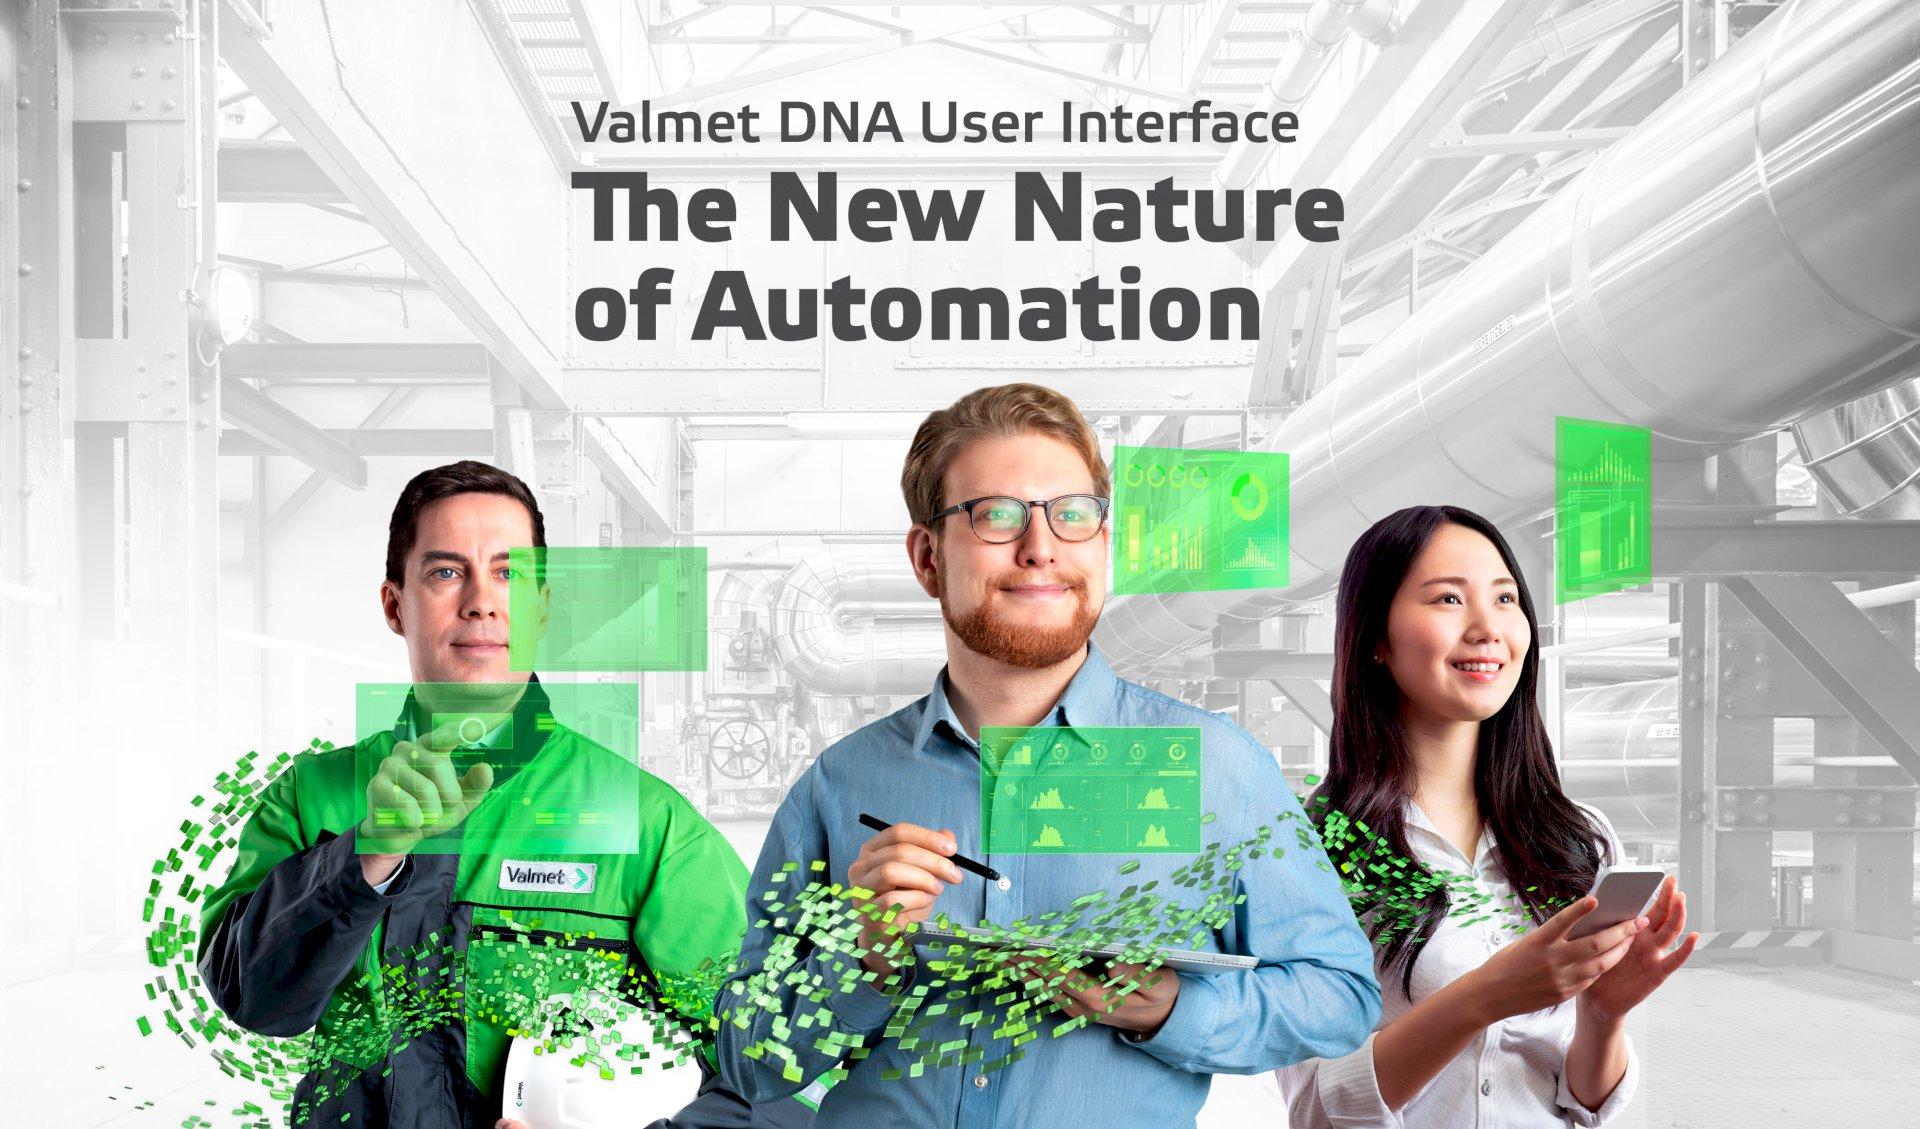 Valmet DNA User Interface - The New Nature of Automation